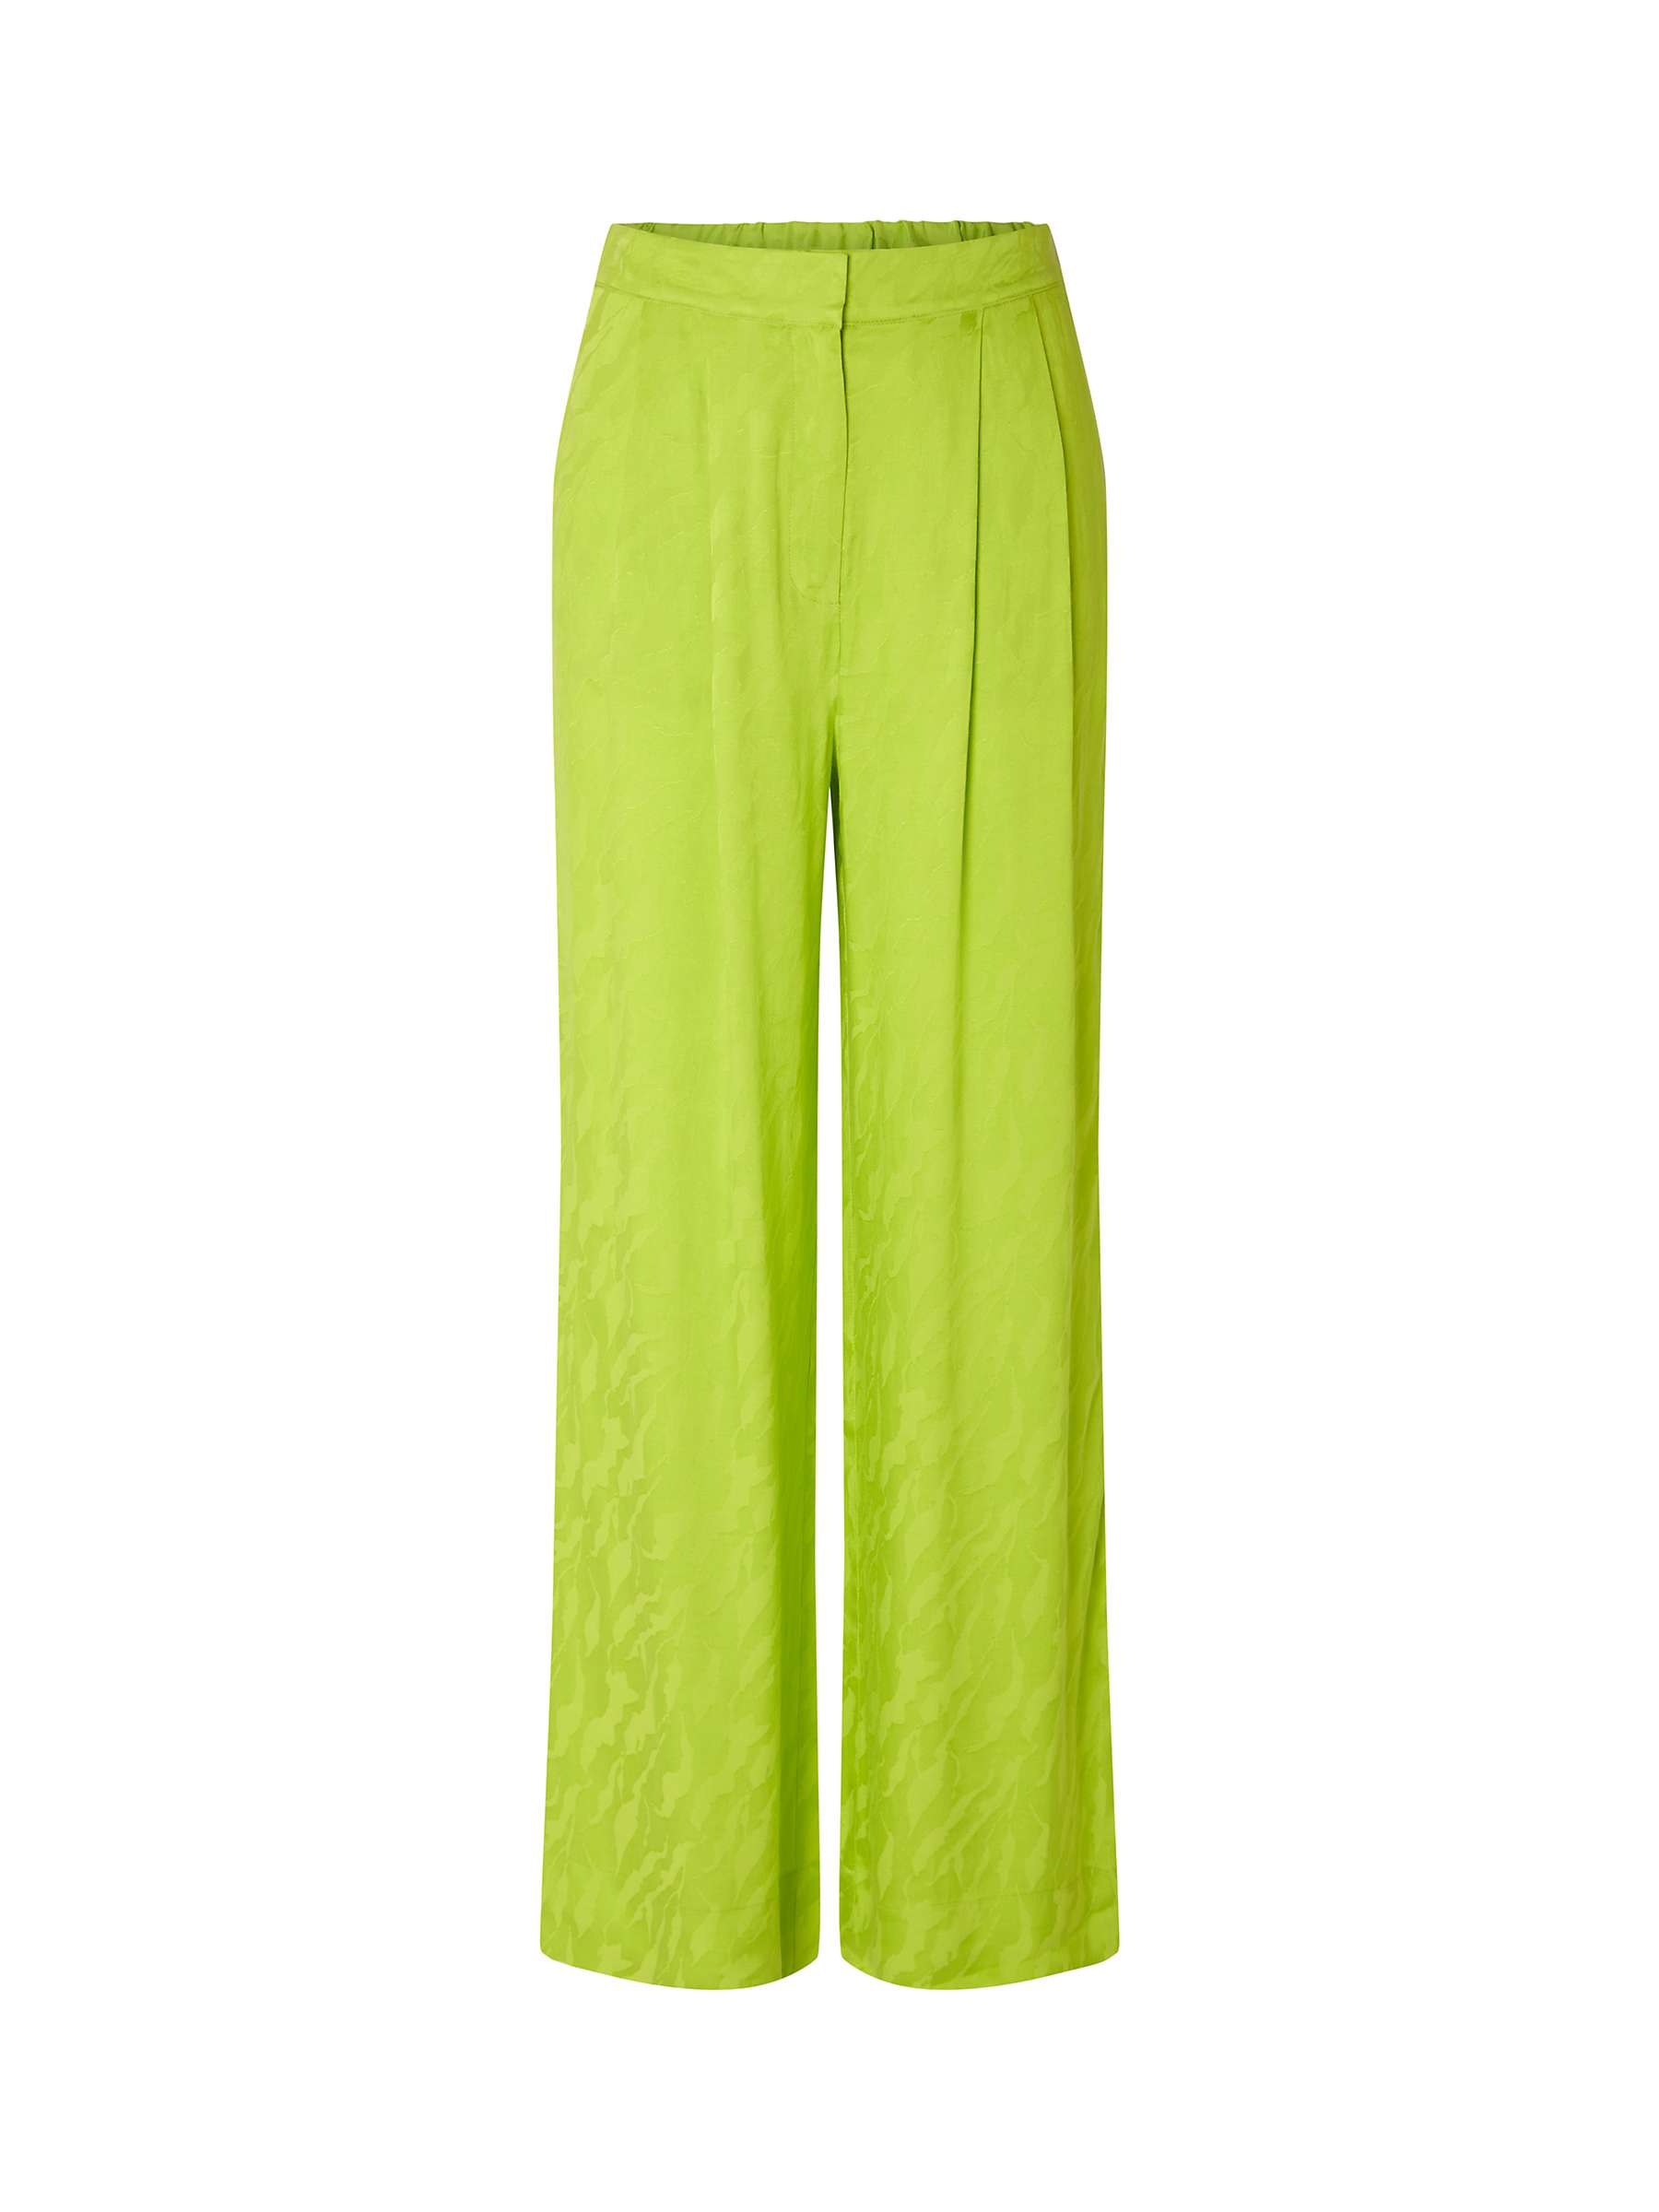 Buy SELECTED FEMME Constanza Straight Leg Trousers, Lime Green Online at johnlewis.com